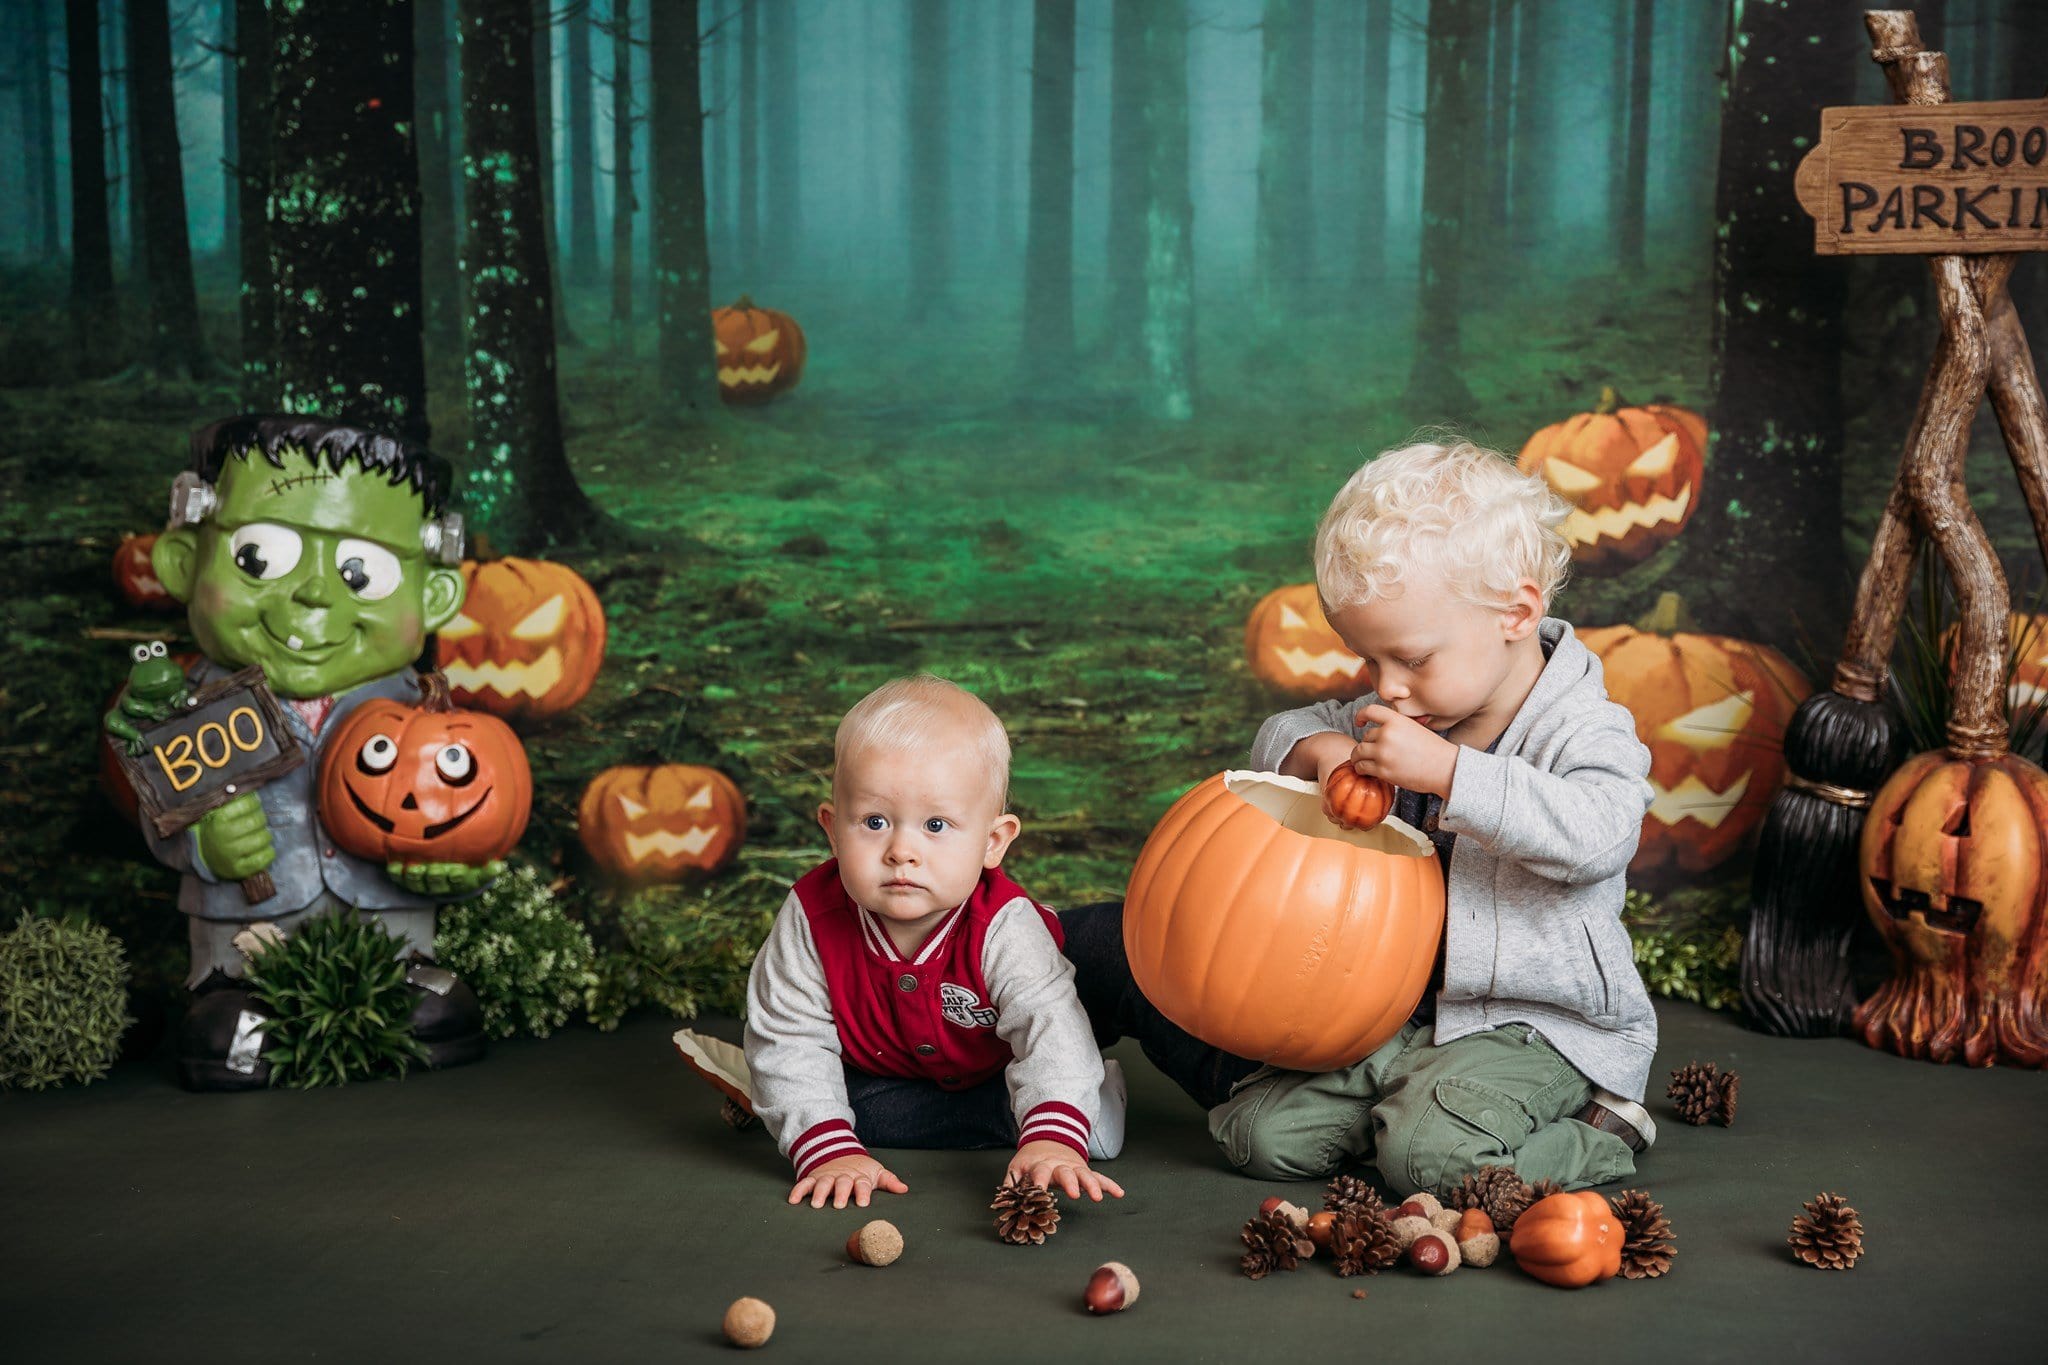 Kate Halloween Backdrop Pumpkins Forest Designed by Chain Photography